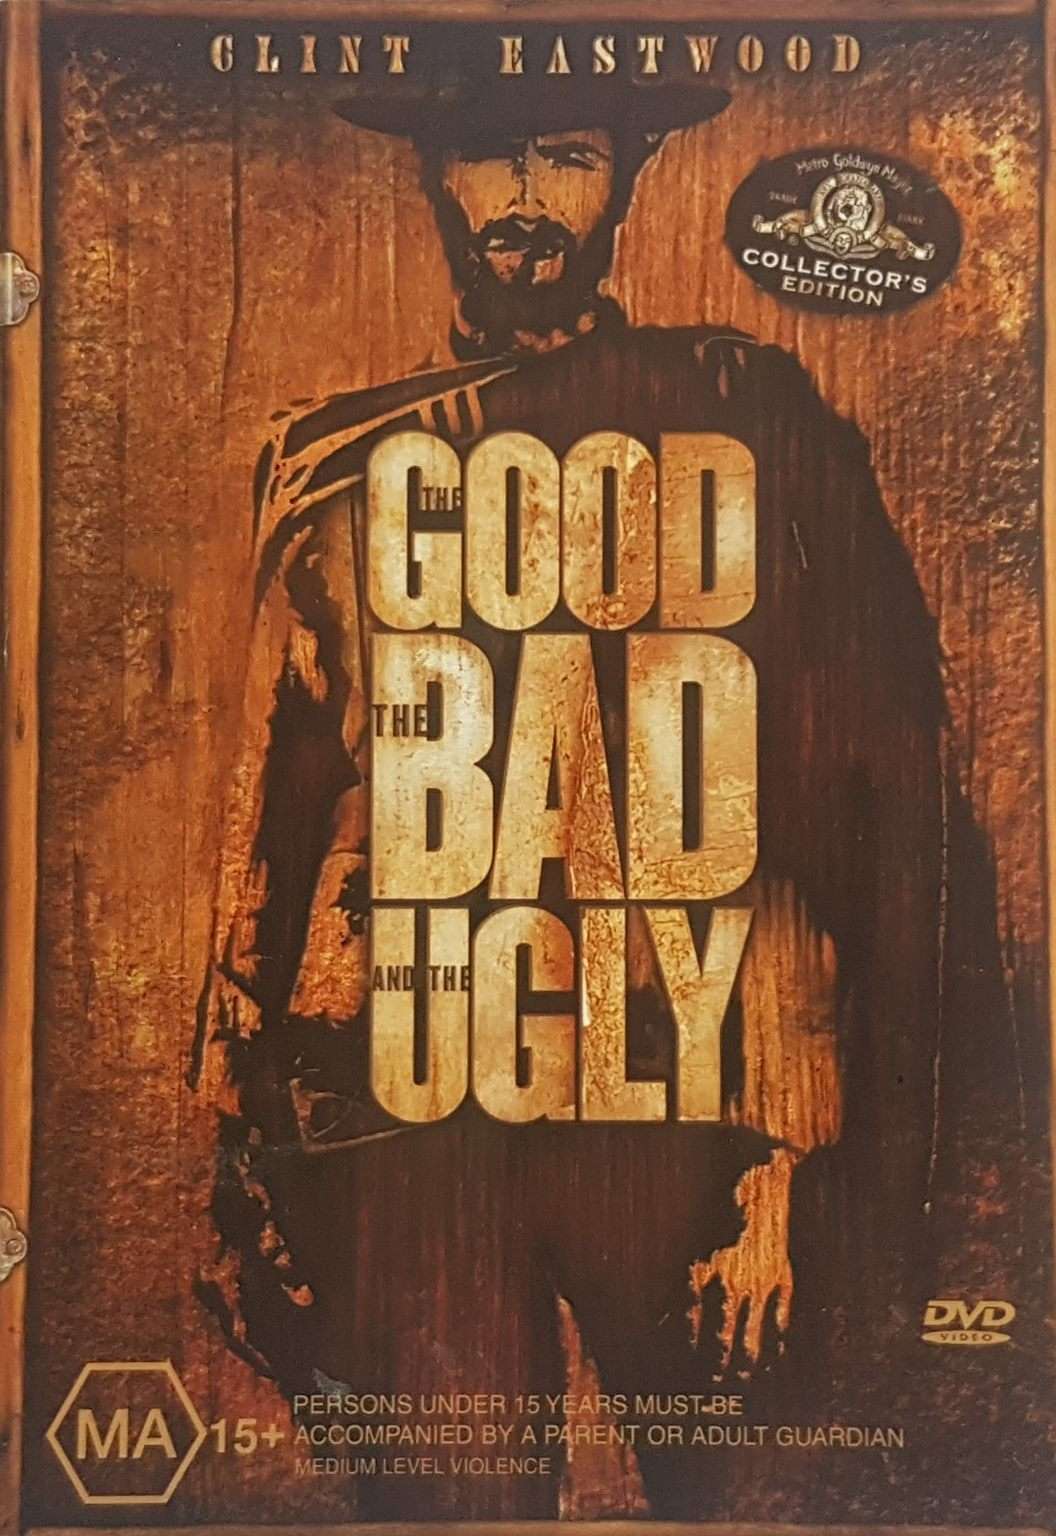 The Good the Bad and the Ugly Collector's Edition w/ booklet and poster cards